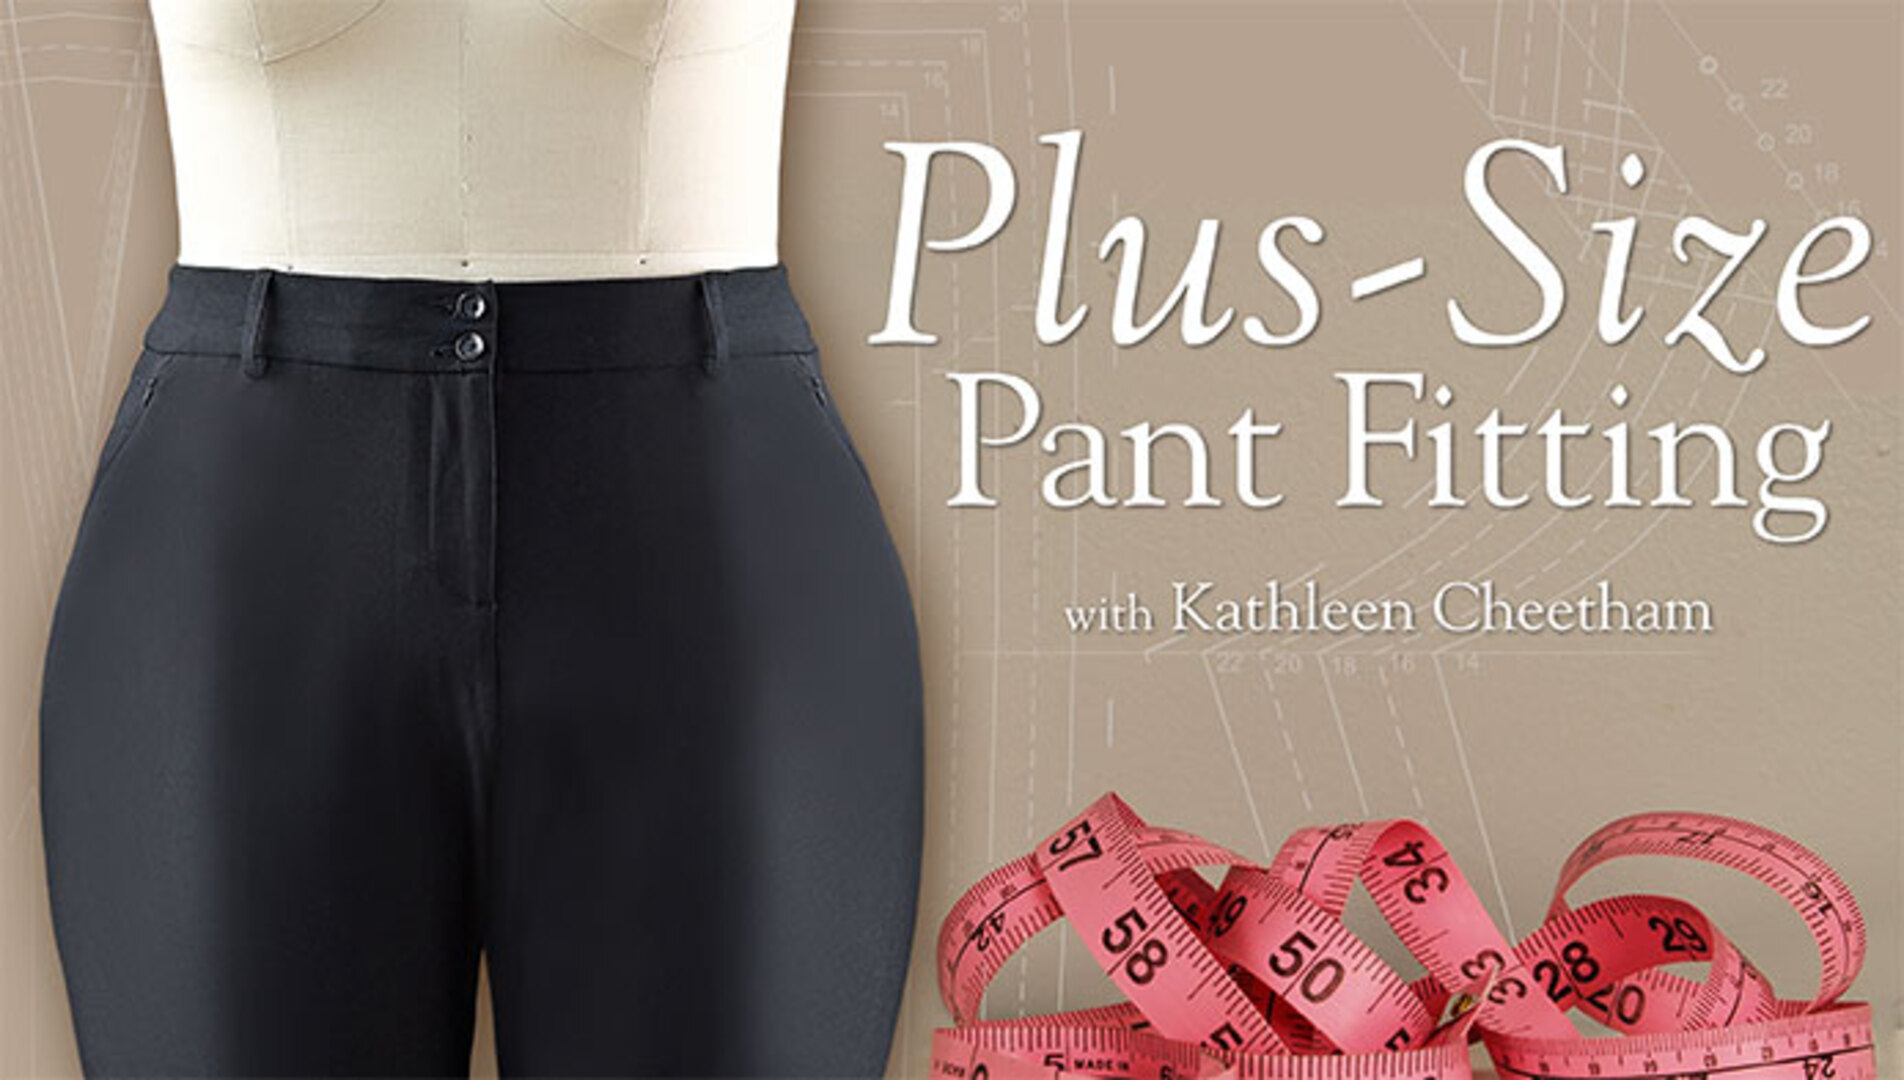 Easy Fitting the Palmer/Pletsch Way: Pants